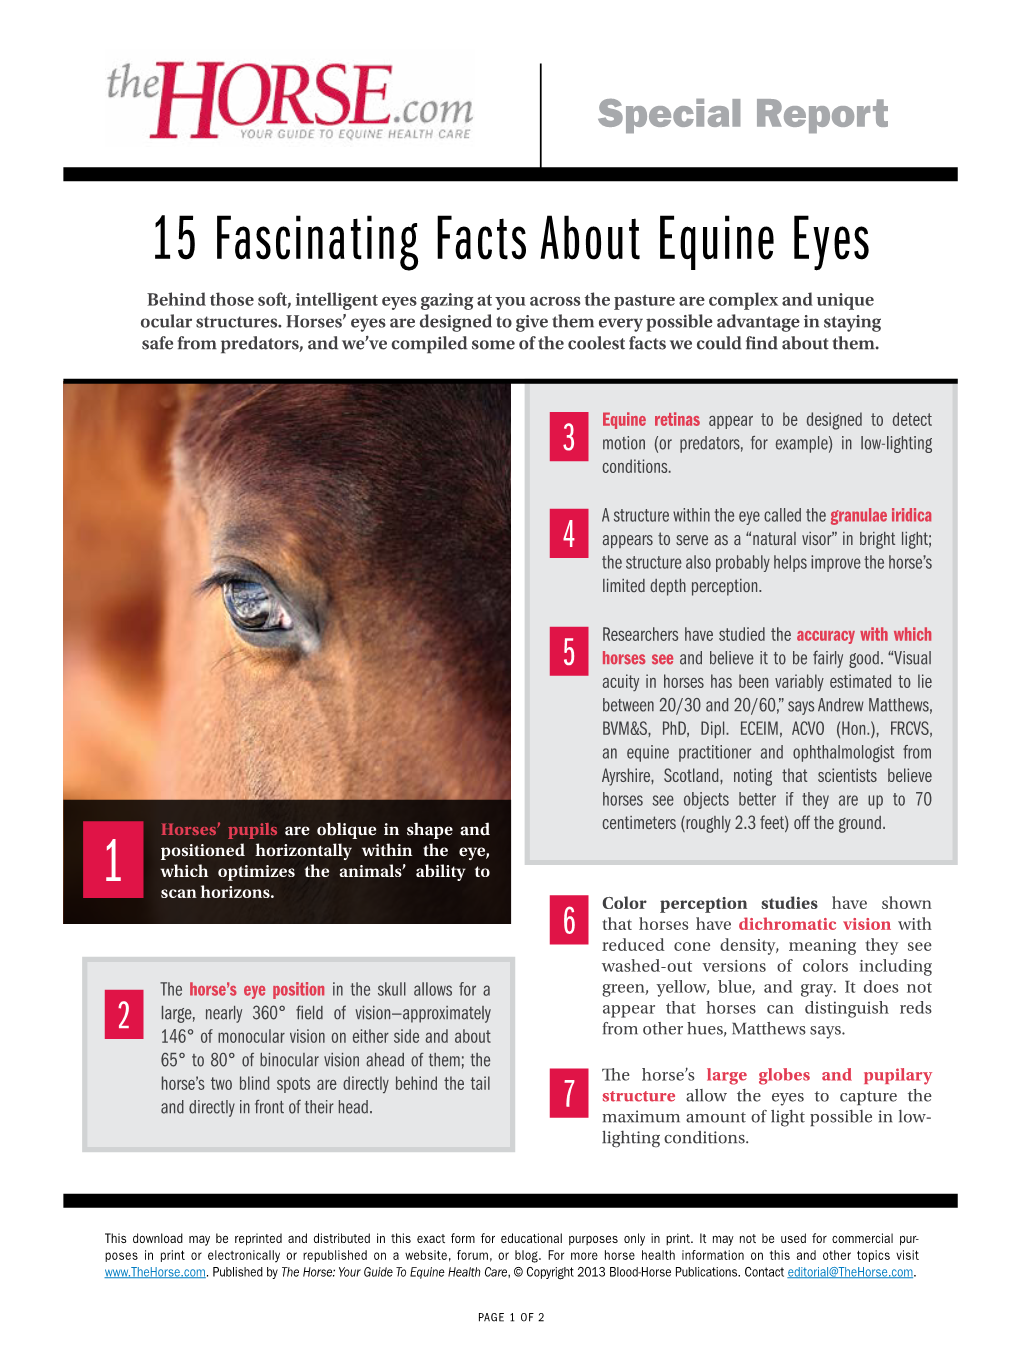 15 Fascinating Facts About Equine Eyes Behind Those Soft, Intelligent Eyes Gazing at You Across the Pasture Are Complex and Unique Ocular Structures